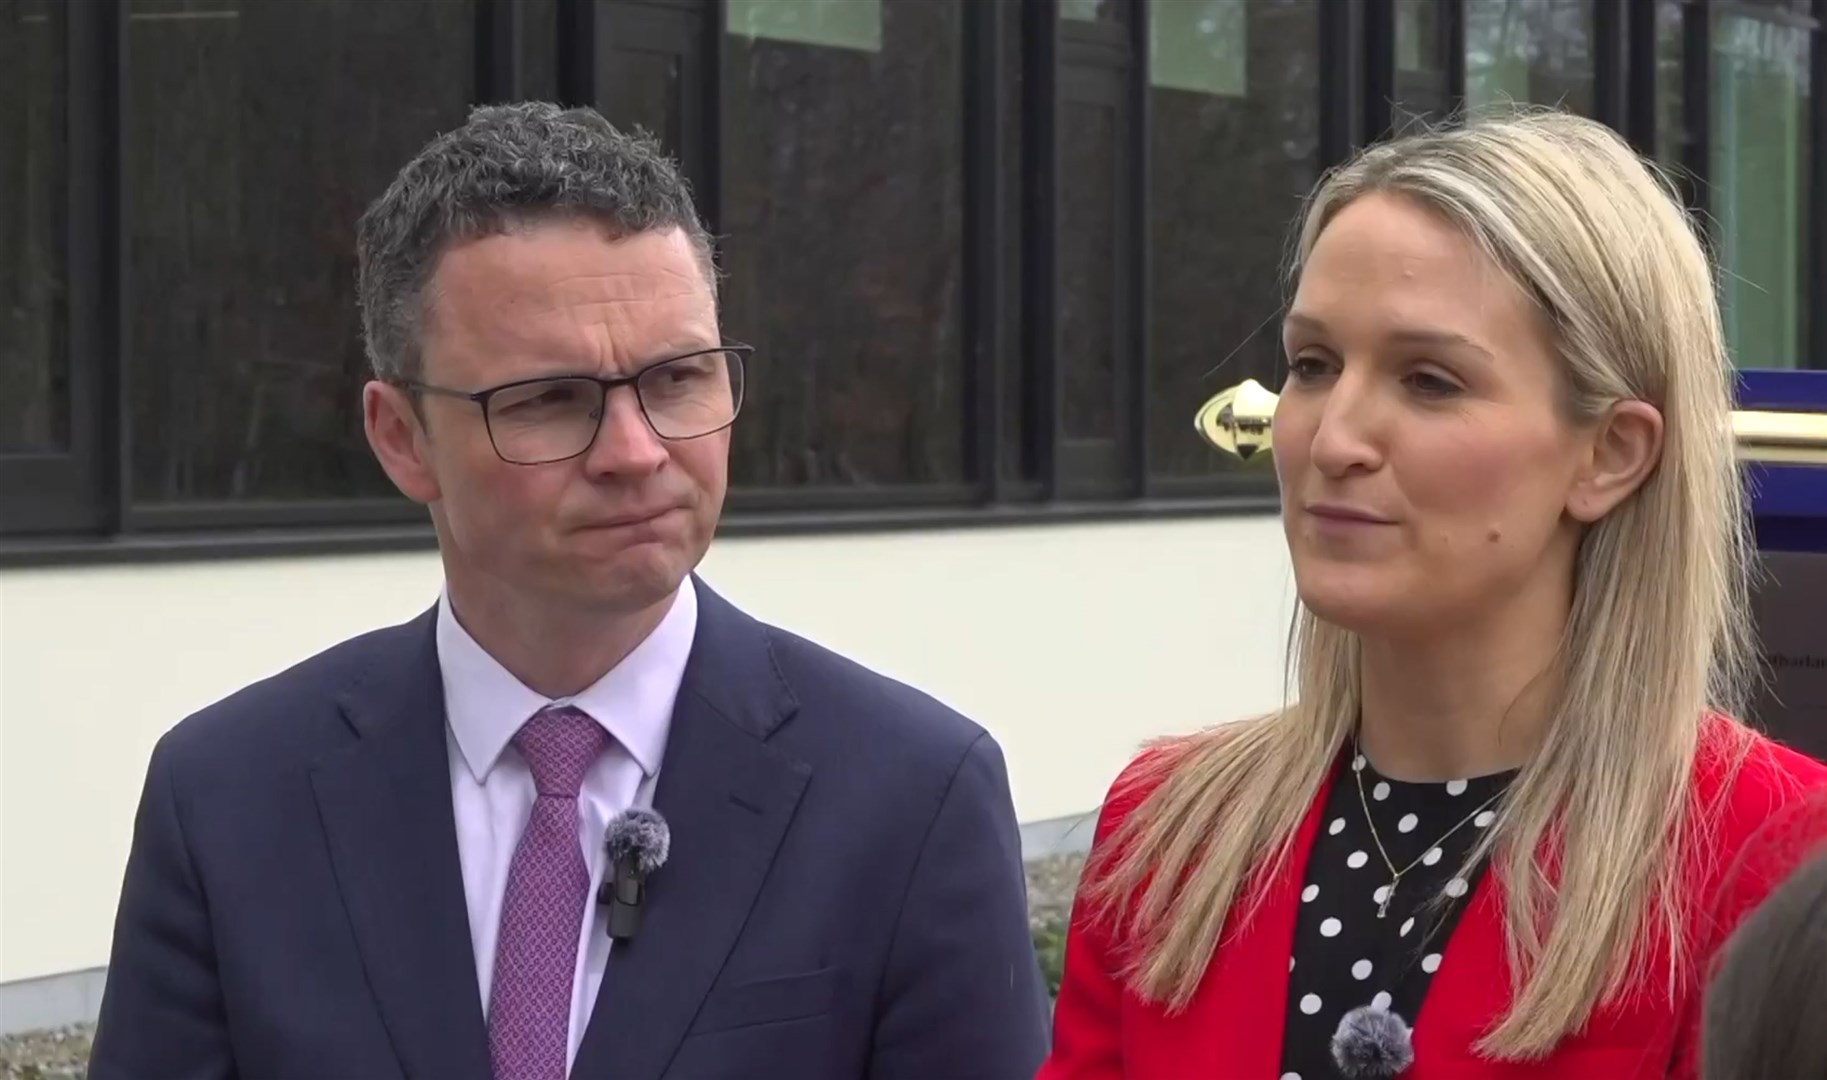 Minister of State Patrick O’Donovan and Minister for Justice Helen McEntee at the Backweston Laboratory Campus in Co Kildare talking to the media about the Fine Gael leadership contest as McEntee rules herself out (PA video)